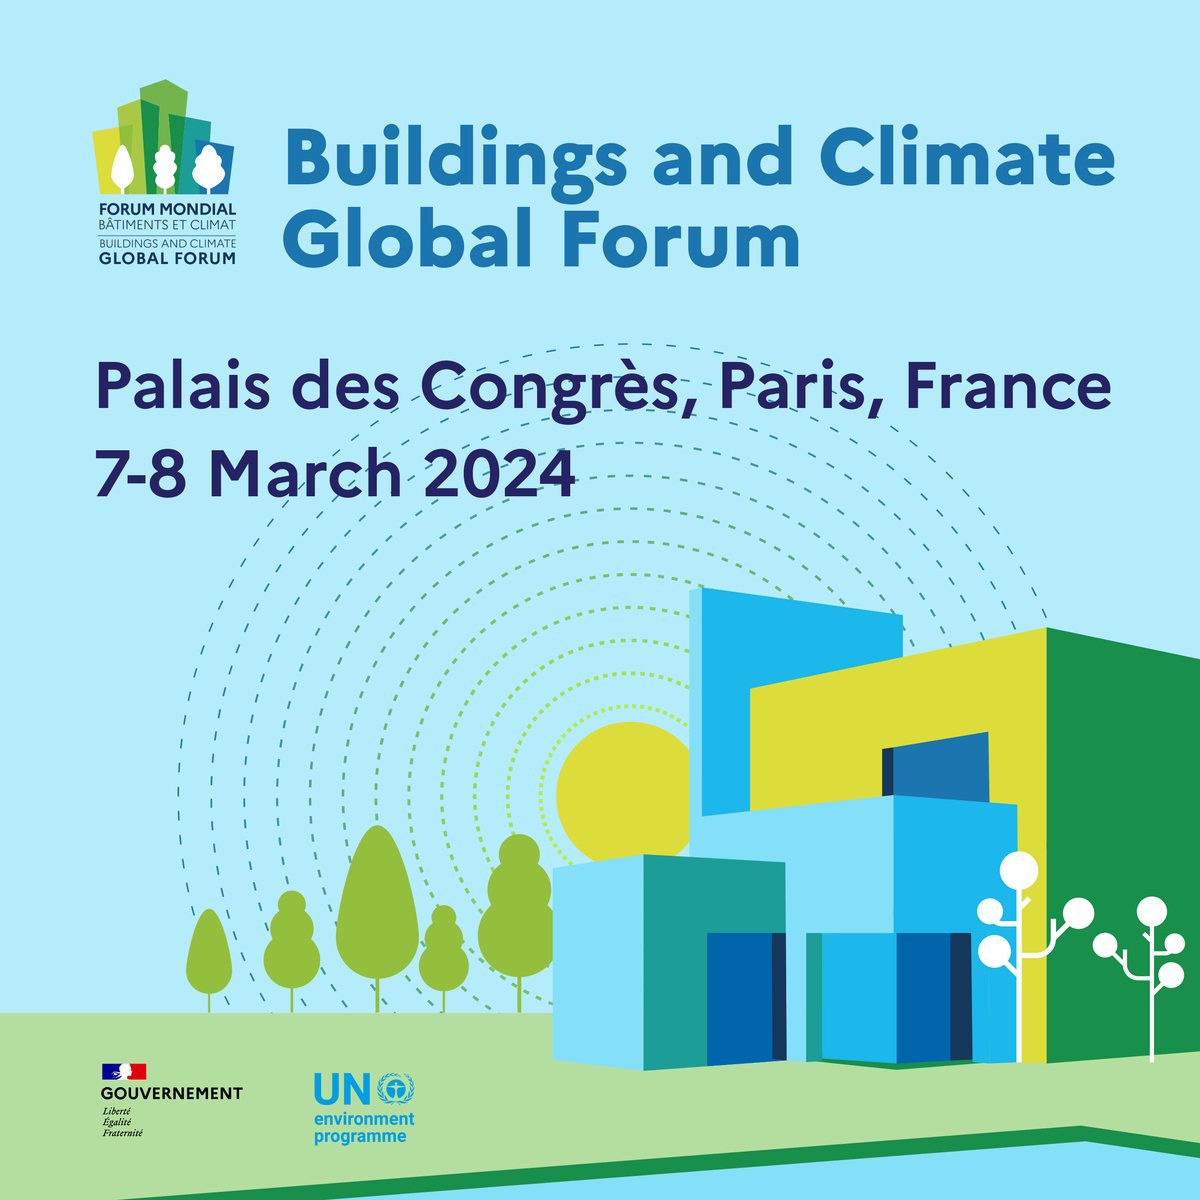 IHBC is pleased to join the Buildings and Climate Global Forum, helping to bring messages to a global stage that building reuse is climate action and scaling up traditional building knowledge is climate action.  #BuildforClimate #BuildingReuseIsClimateAction #CllimateHeritage